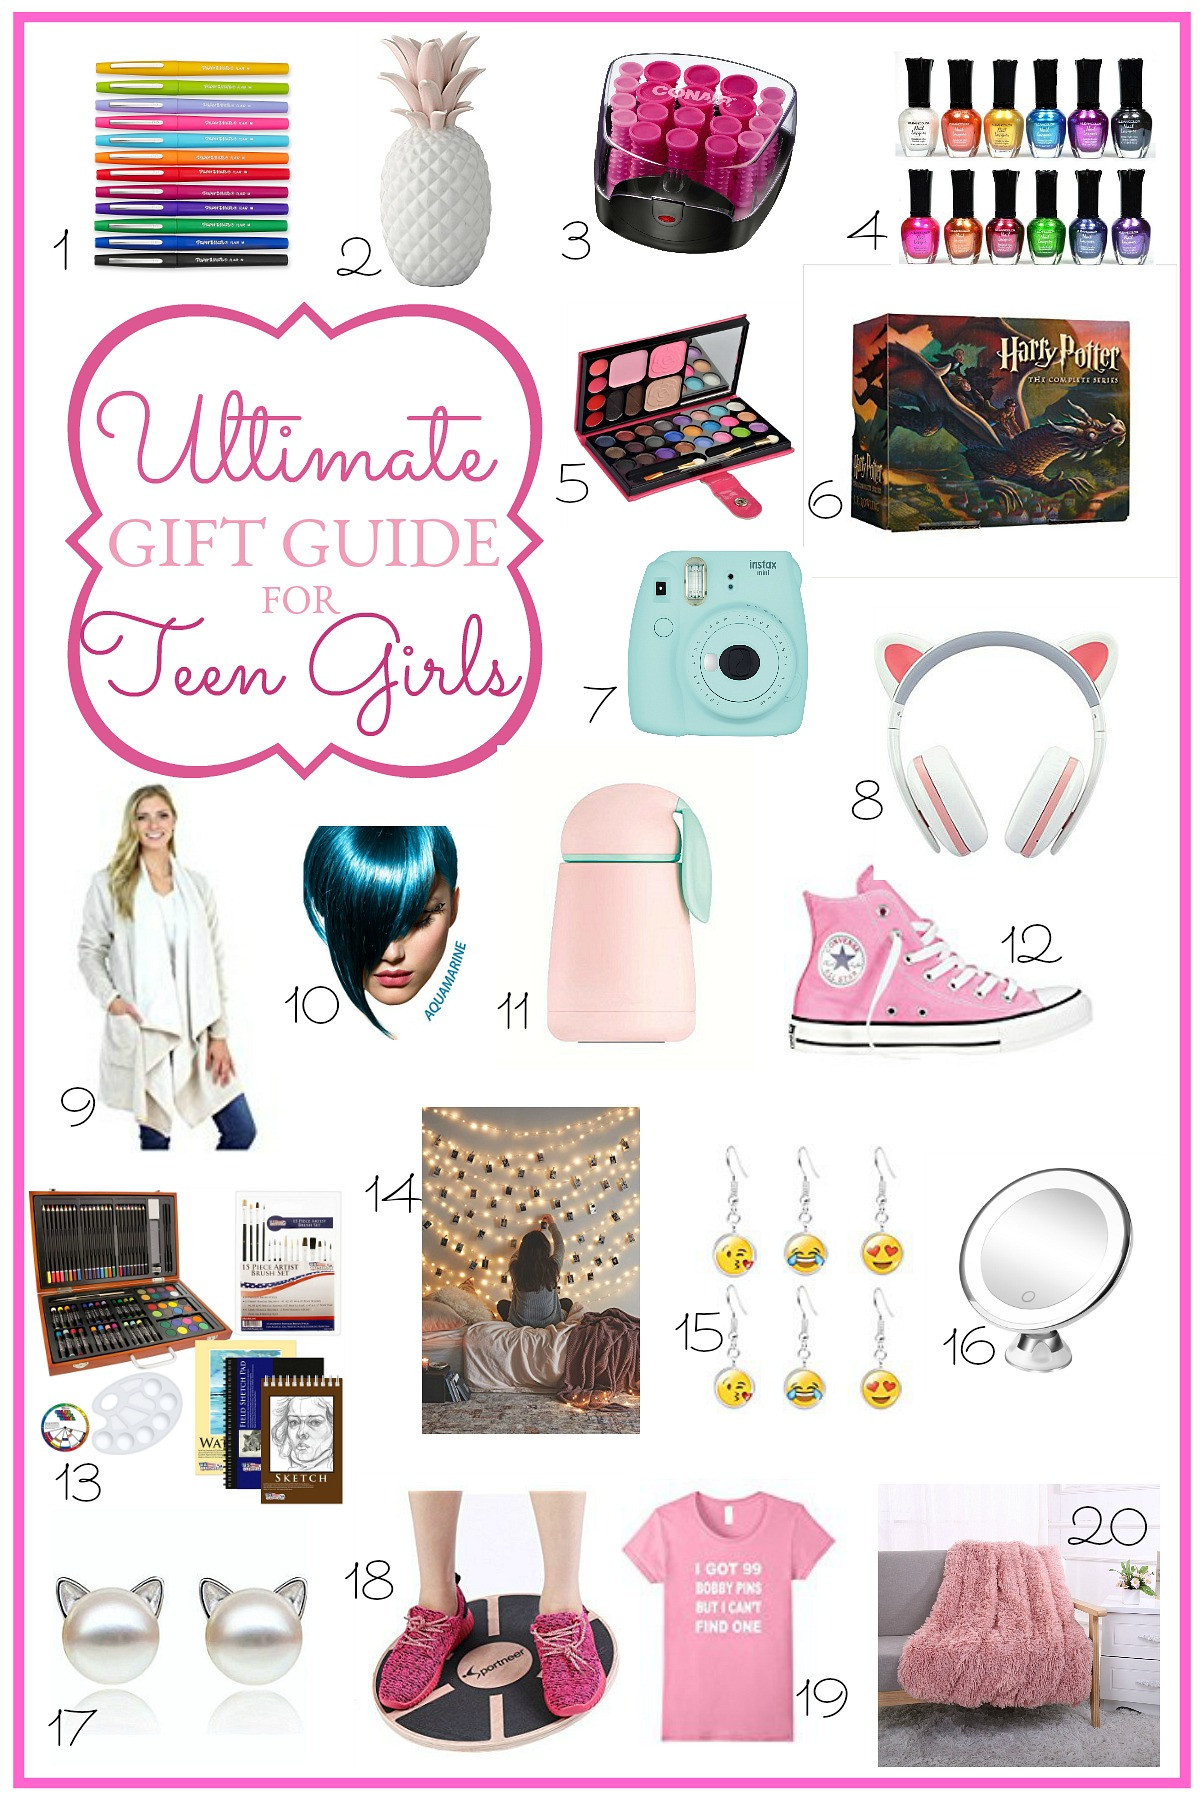 Gift Ideas For Teen Girls
 Ultimate Holiday Gift Guide for Teen Girls